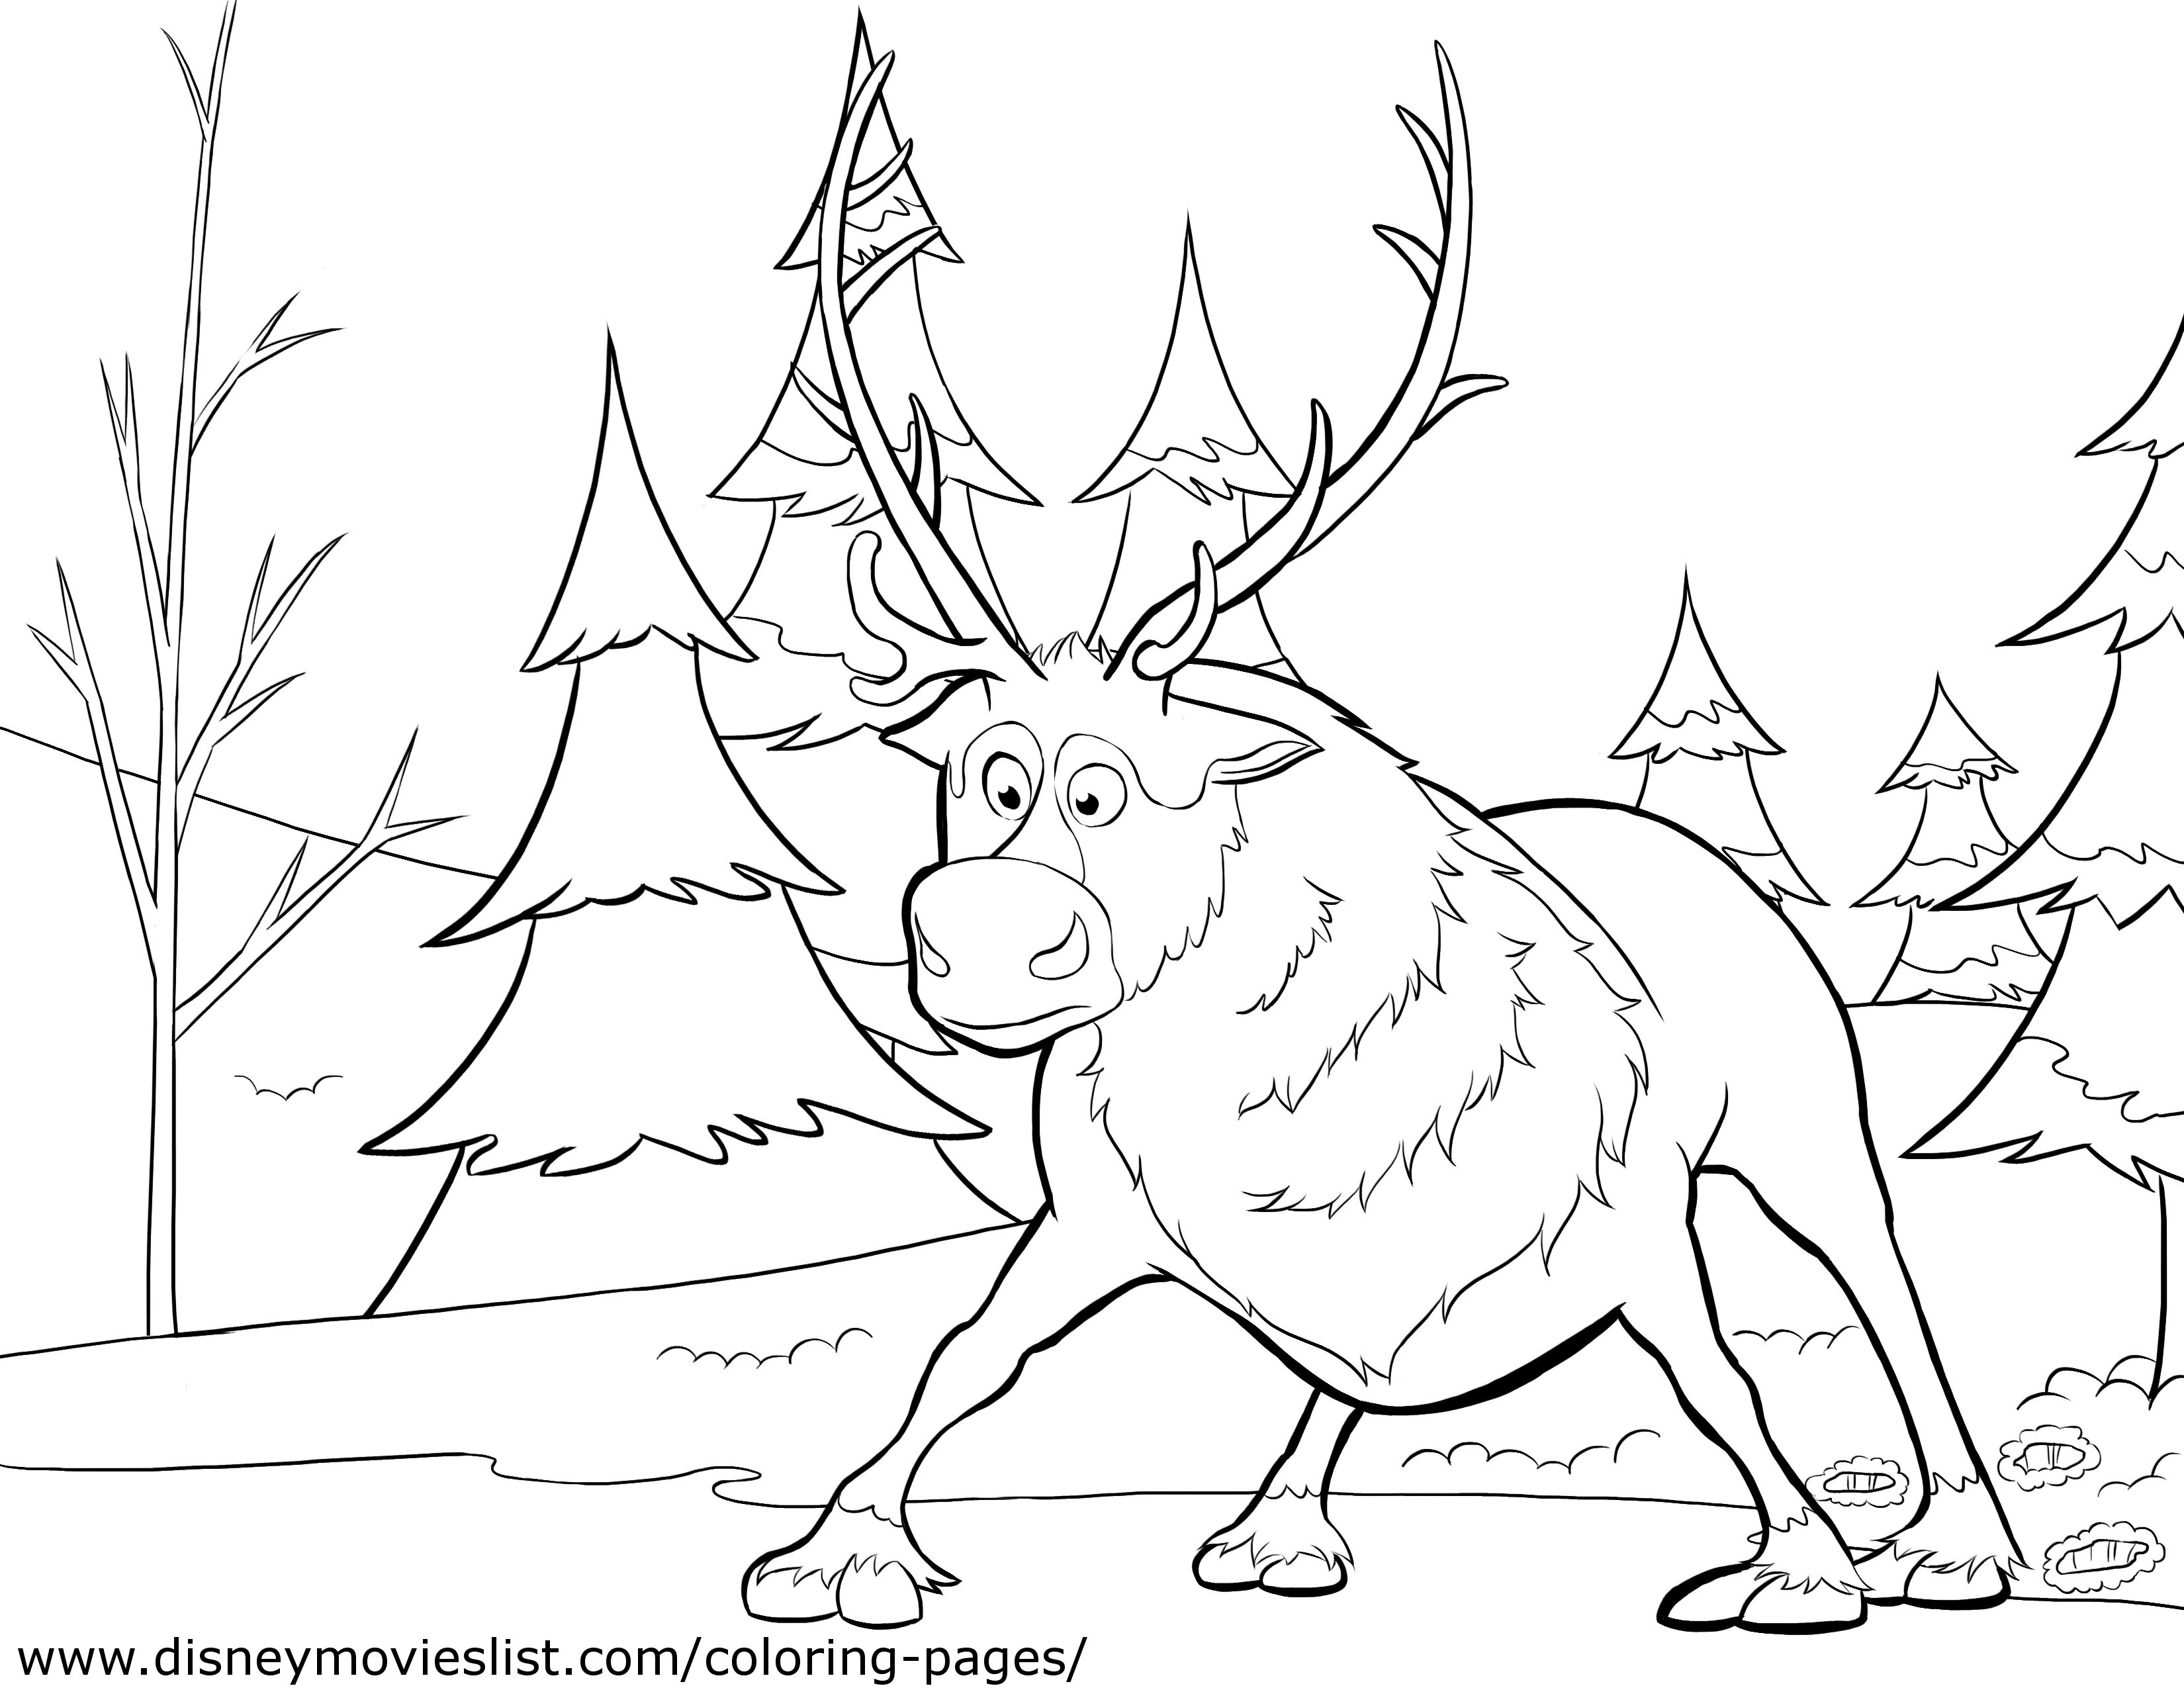 olaf from frozen coloring pages - photo #33